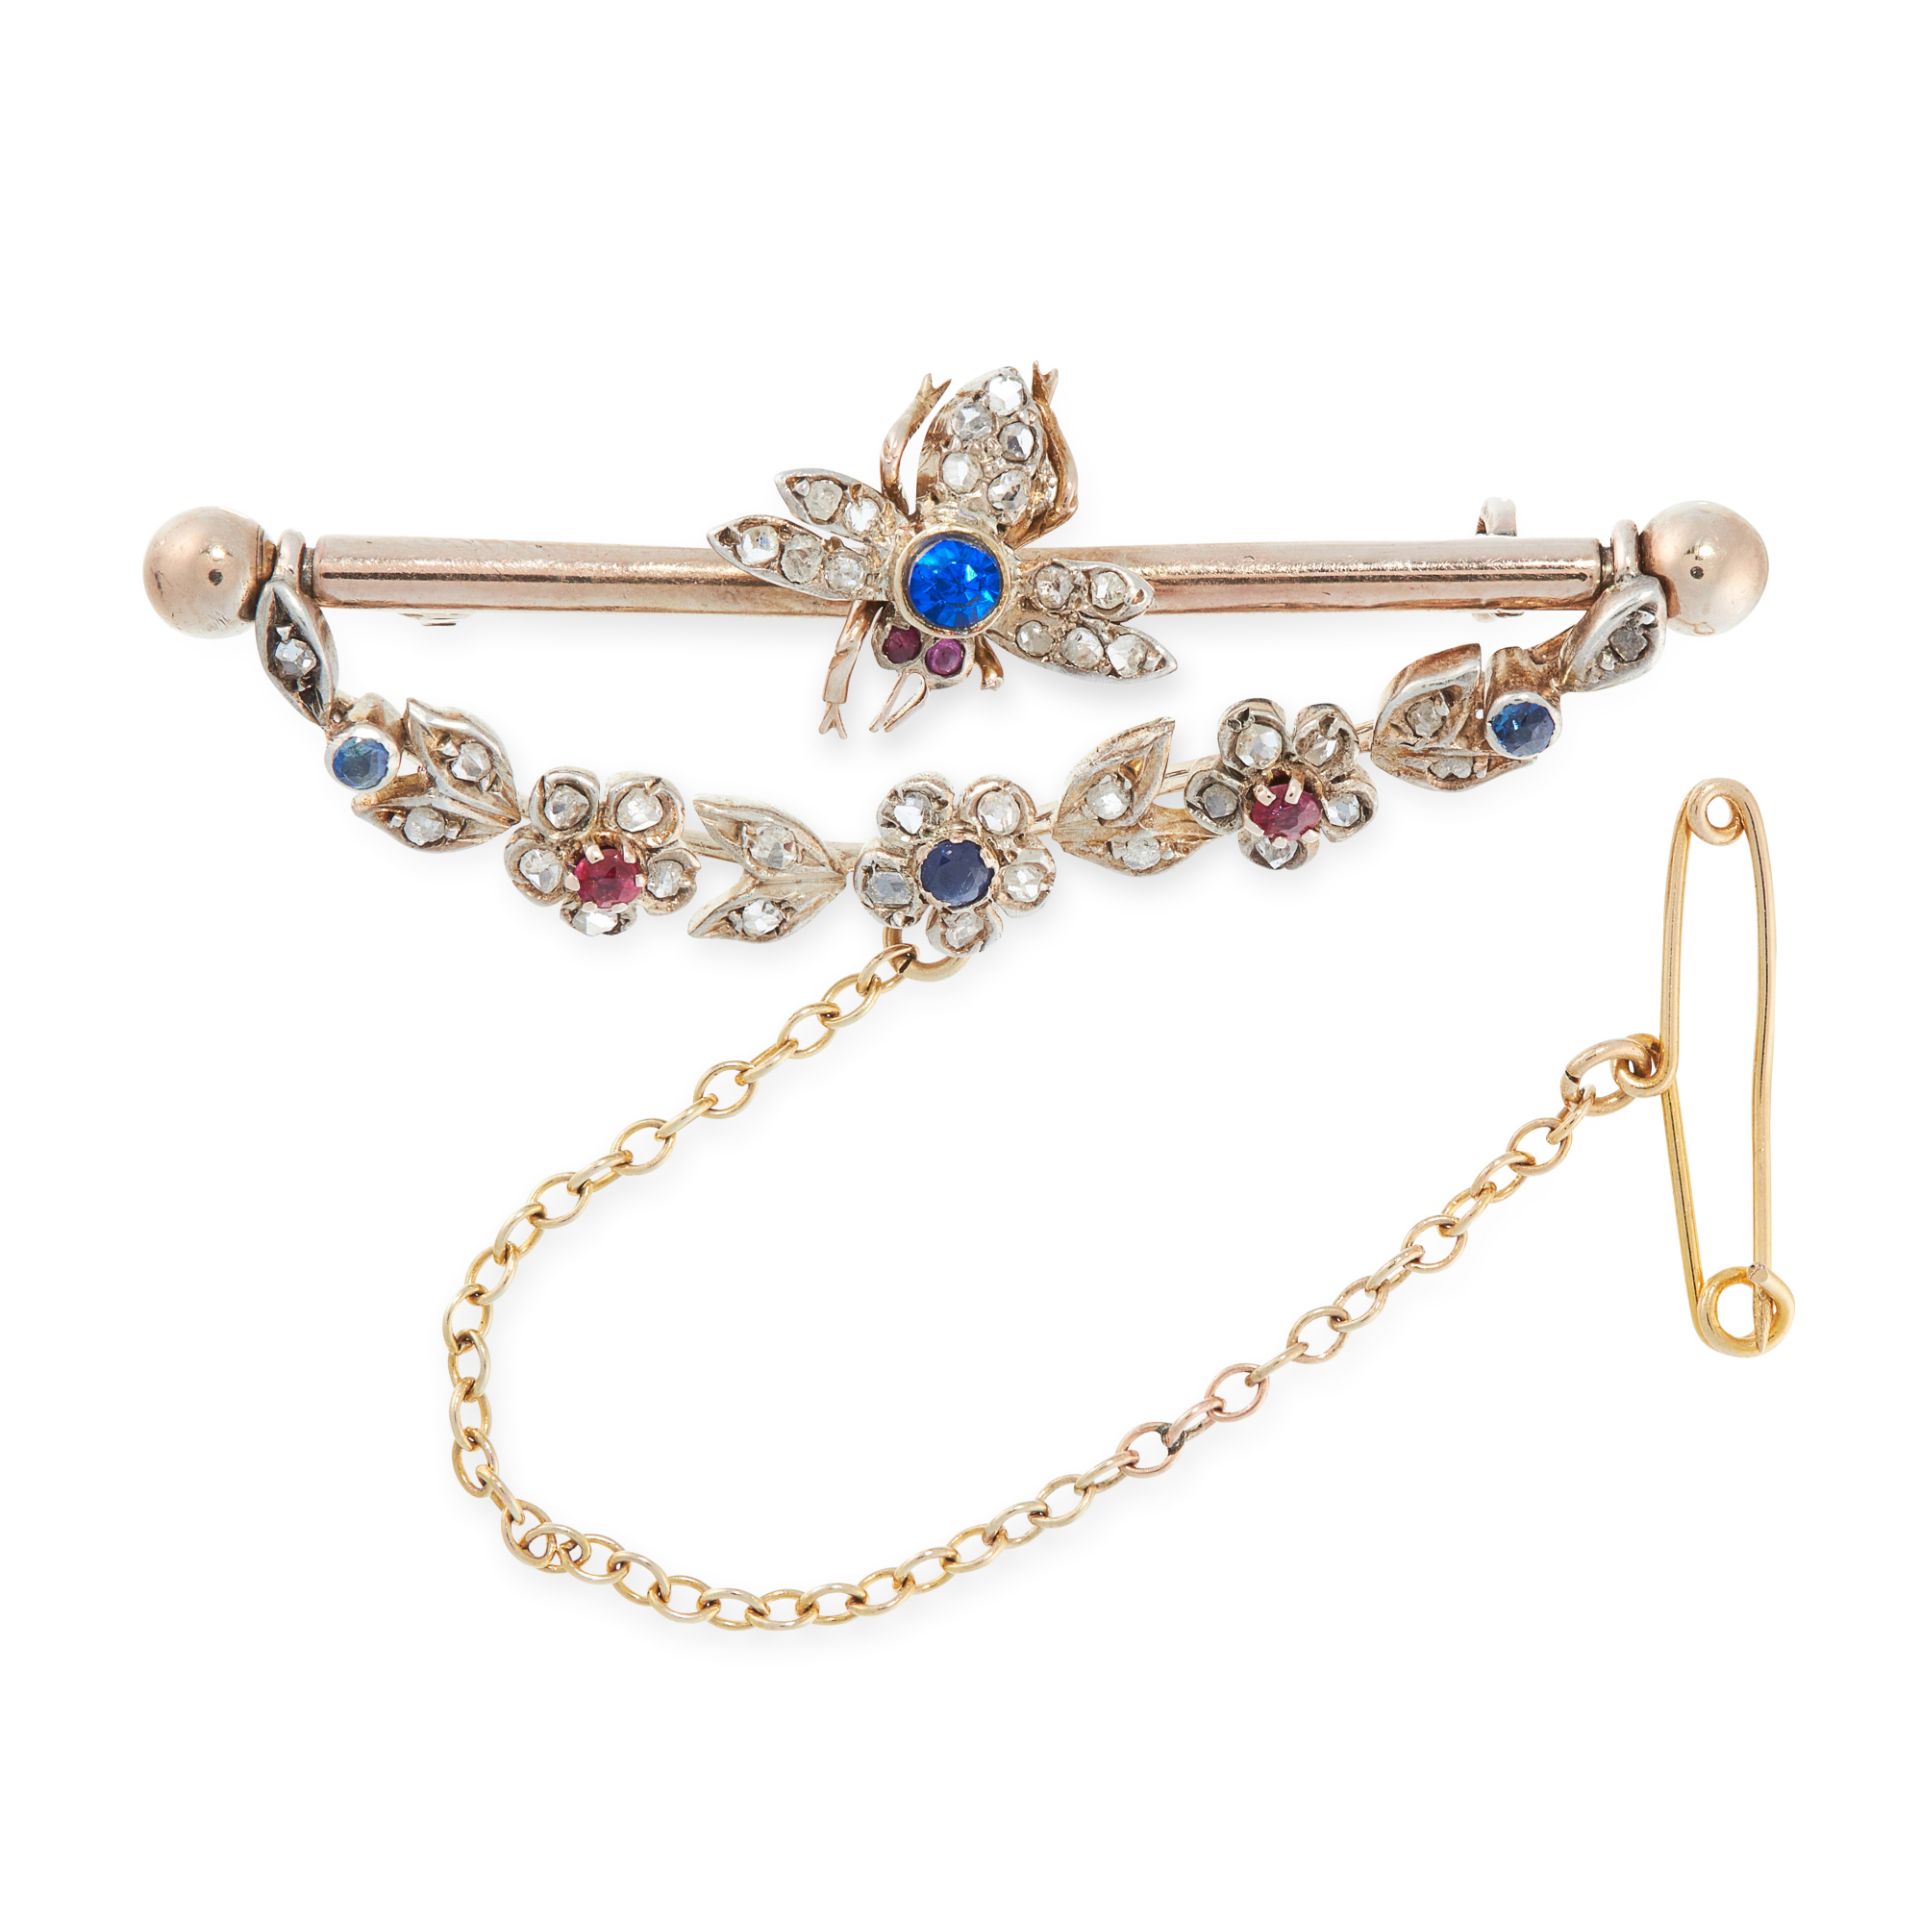 AN ANTIQUE SAPPHIRE, RUBY AND DIAMOND BEE BROOCH in yellow gold and silver, the central bar